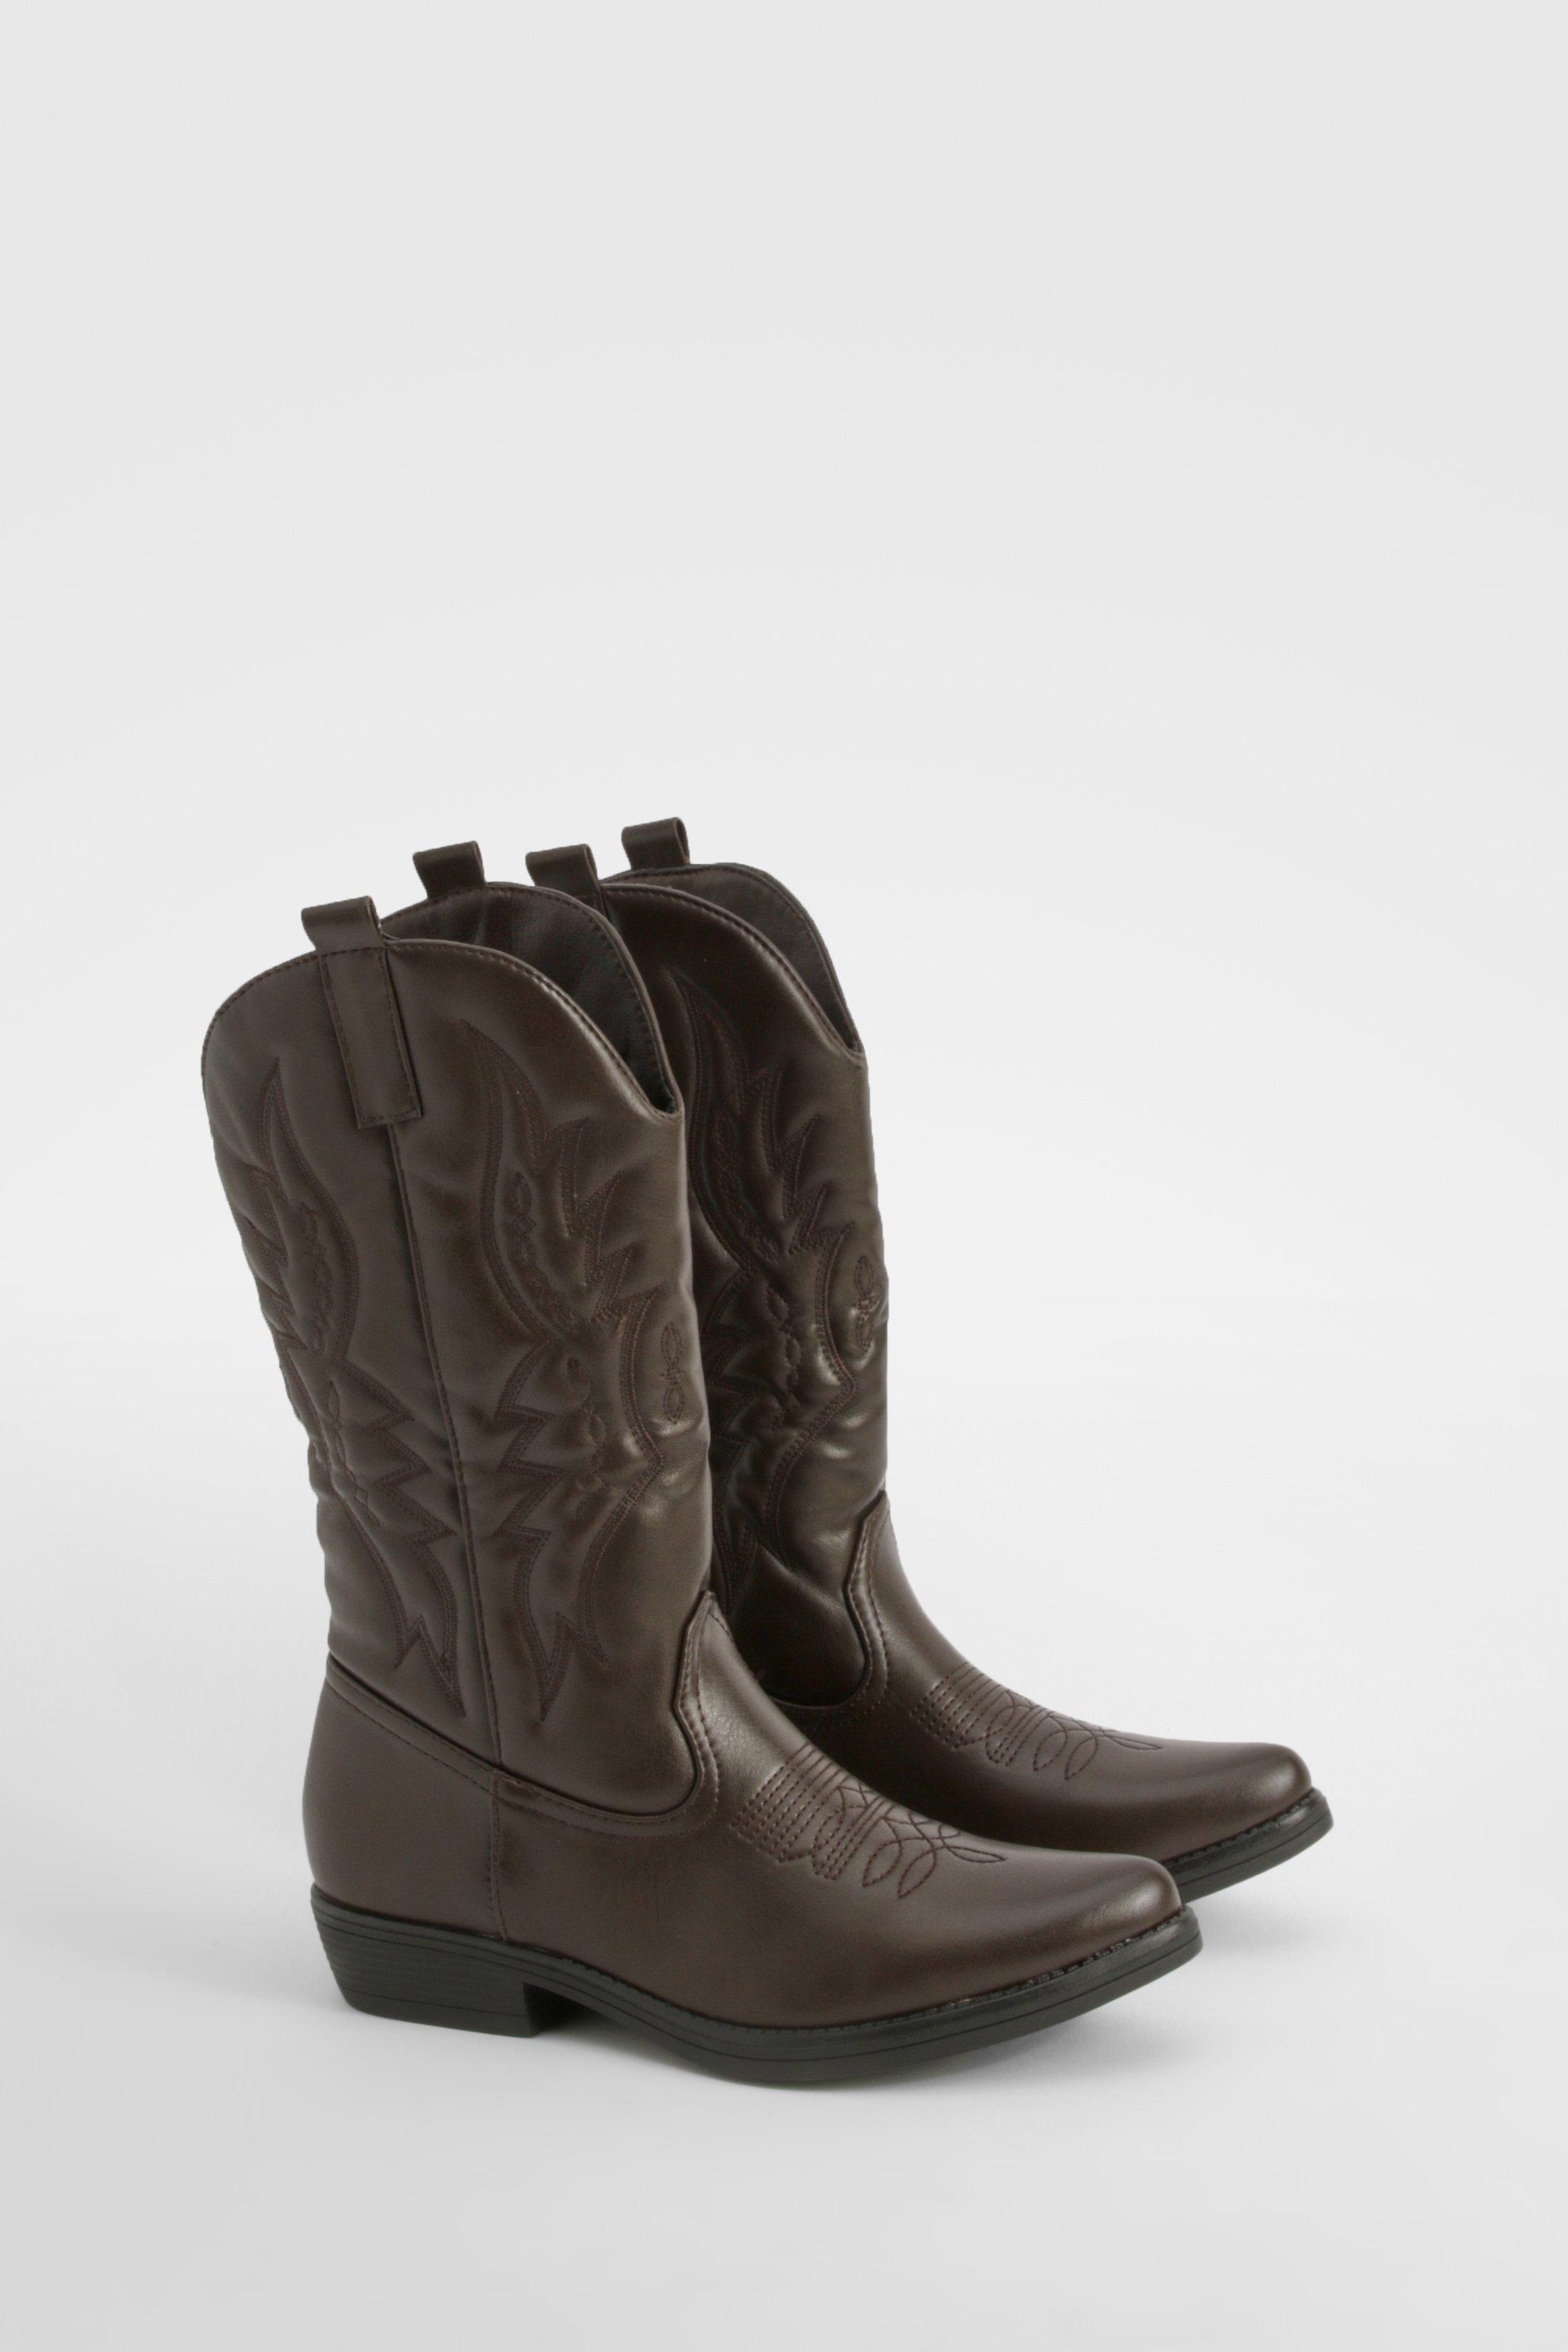 Boohoo Embroidered Western Cowboy Boots, Brown